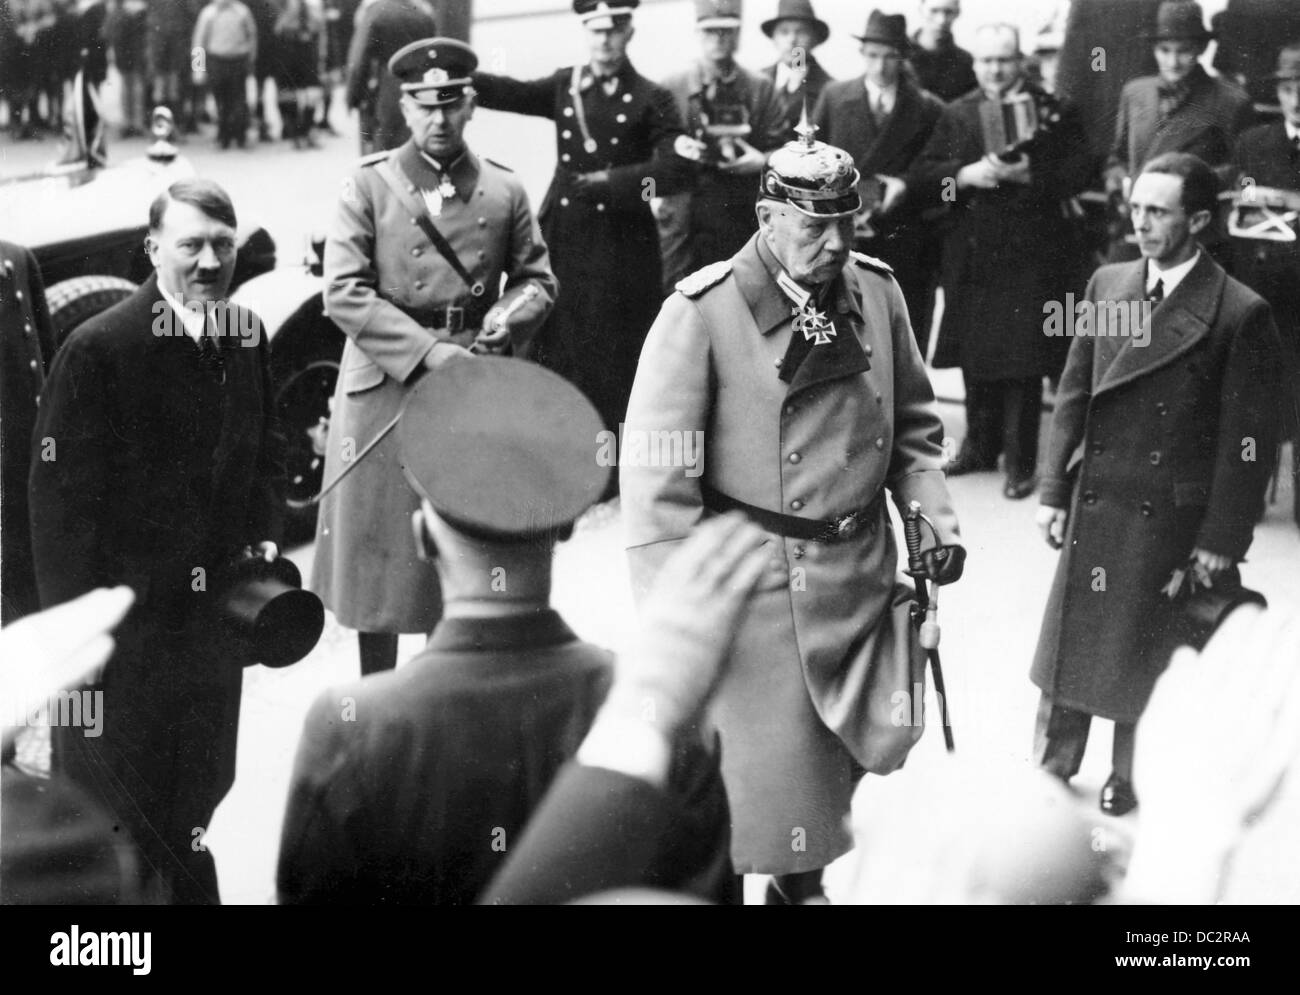 Reich President Paul von Hindenburg walks with Reich Chancellor Adolf Hitler and Reich  Minister Joseph Goebbels (r) towards the Opera in Berlin, Germany, on the occasion of the Day of Commemoration of Heroes on 25 February 1934. Fotoarchiv für Zeitgeschichte Stock Photo